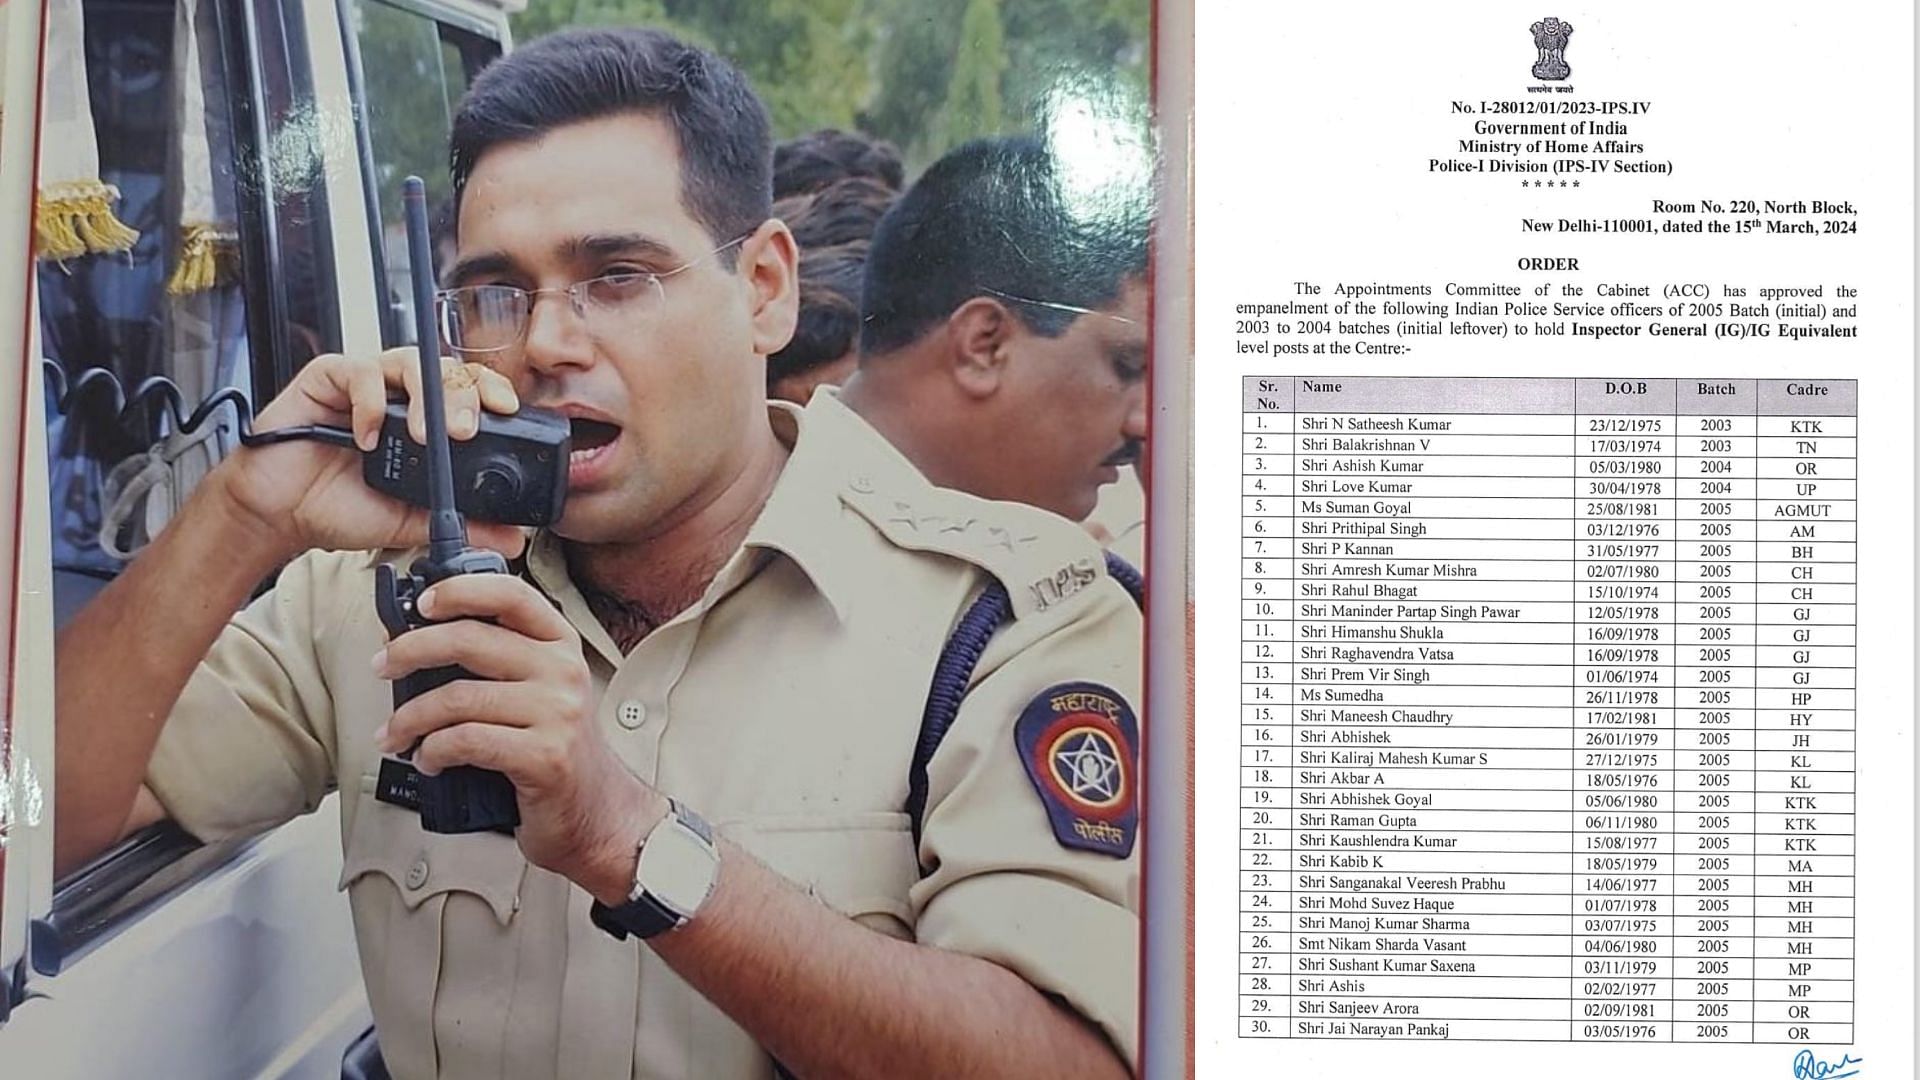 IPS officer Manoj Sharma has now been promoted as Inspector General